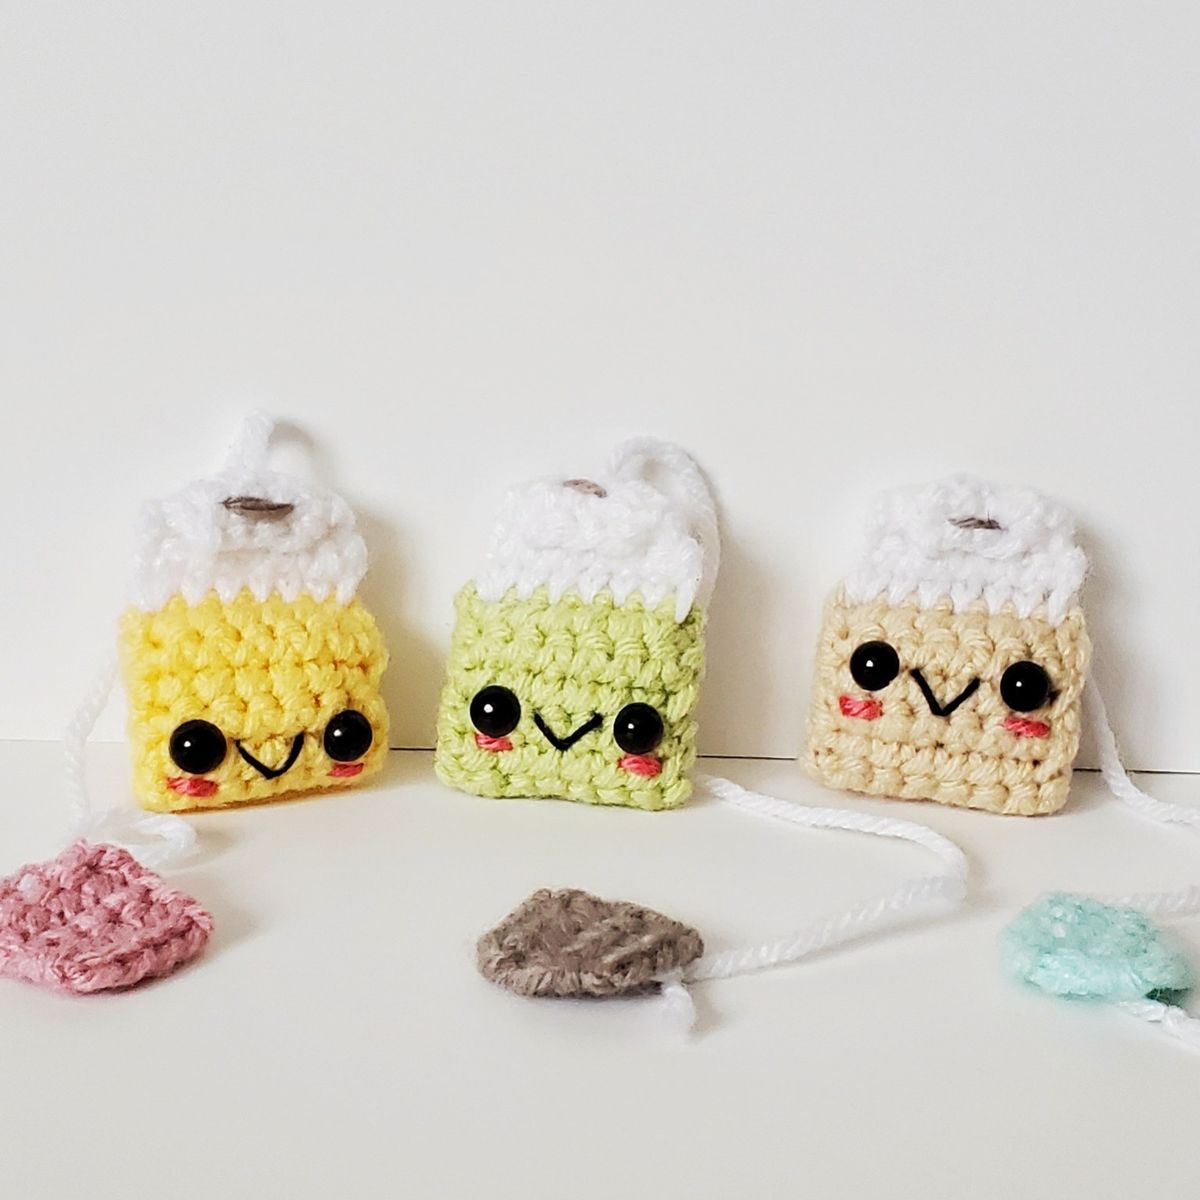 25 Small Crochet Gifts Everyone Can Make (< 1 hour!) - Little World of  Whimsy